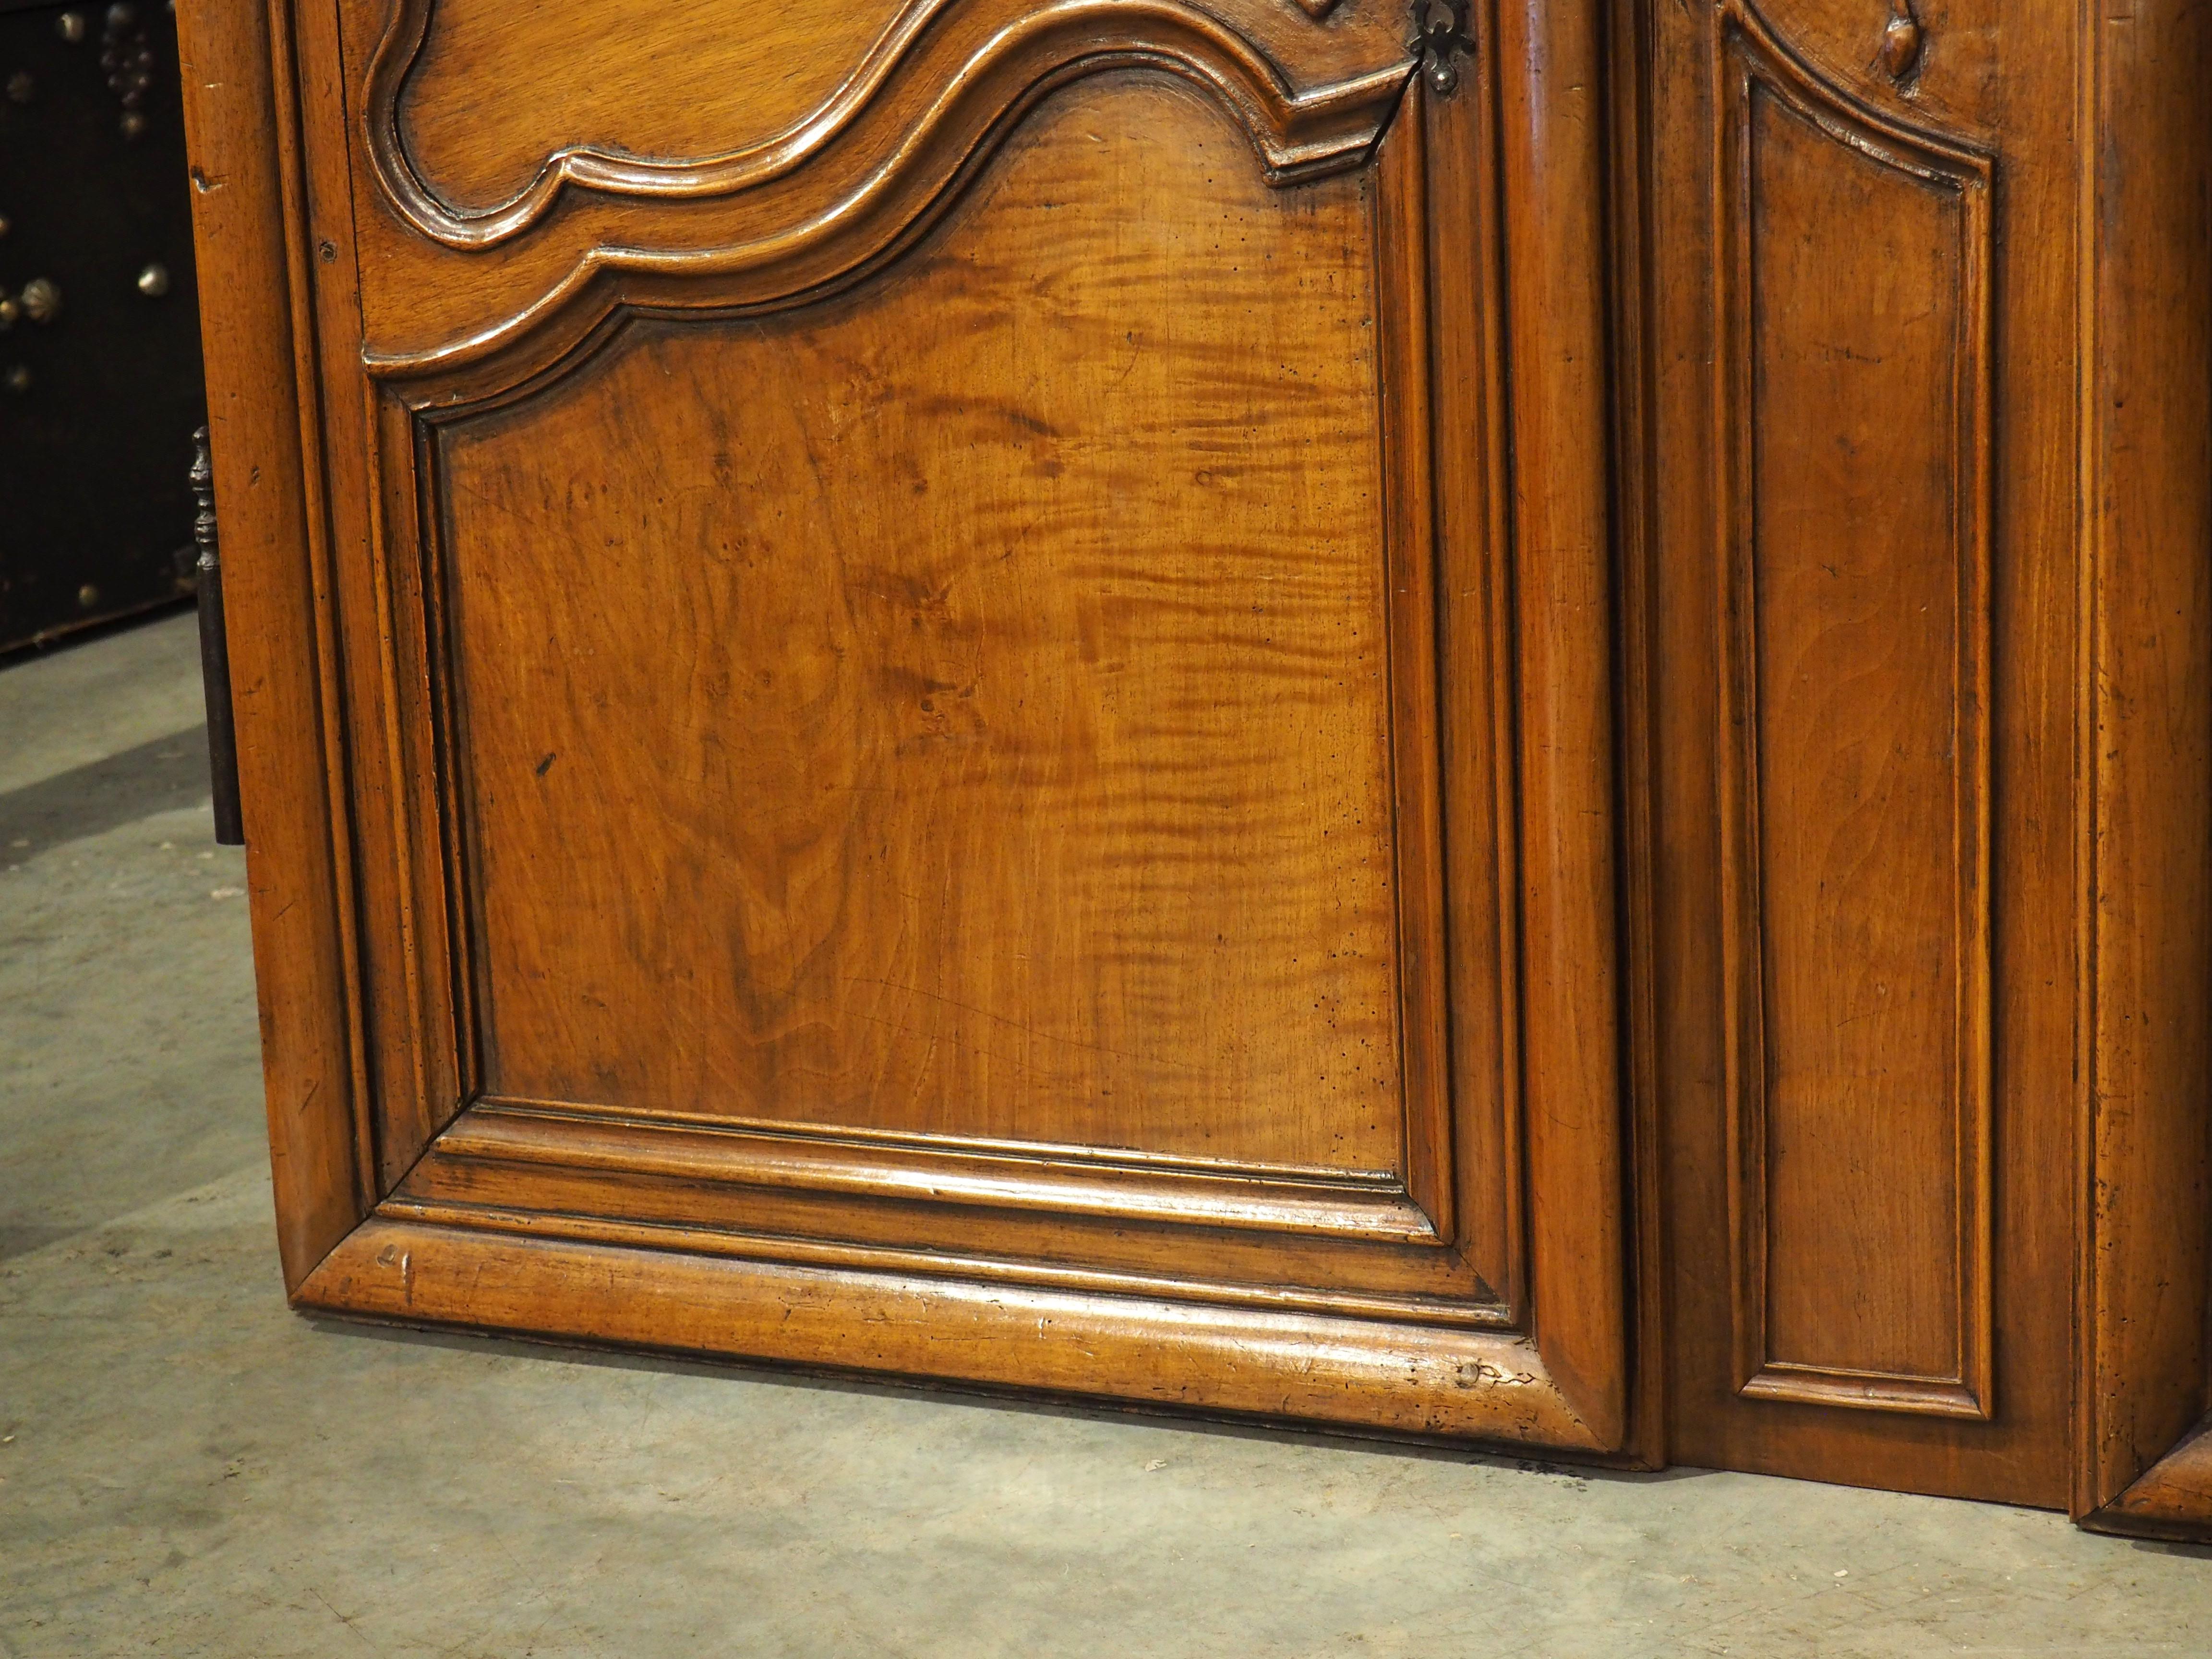 18th Century Pair of Circa 1750 Solid Walnut Façade or Cabinet Doors from Provence, France For Sale